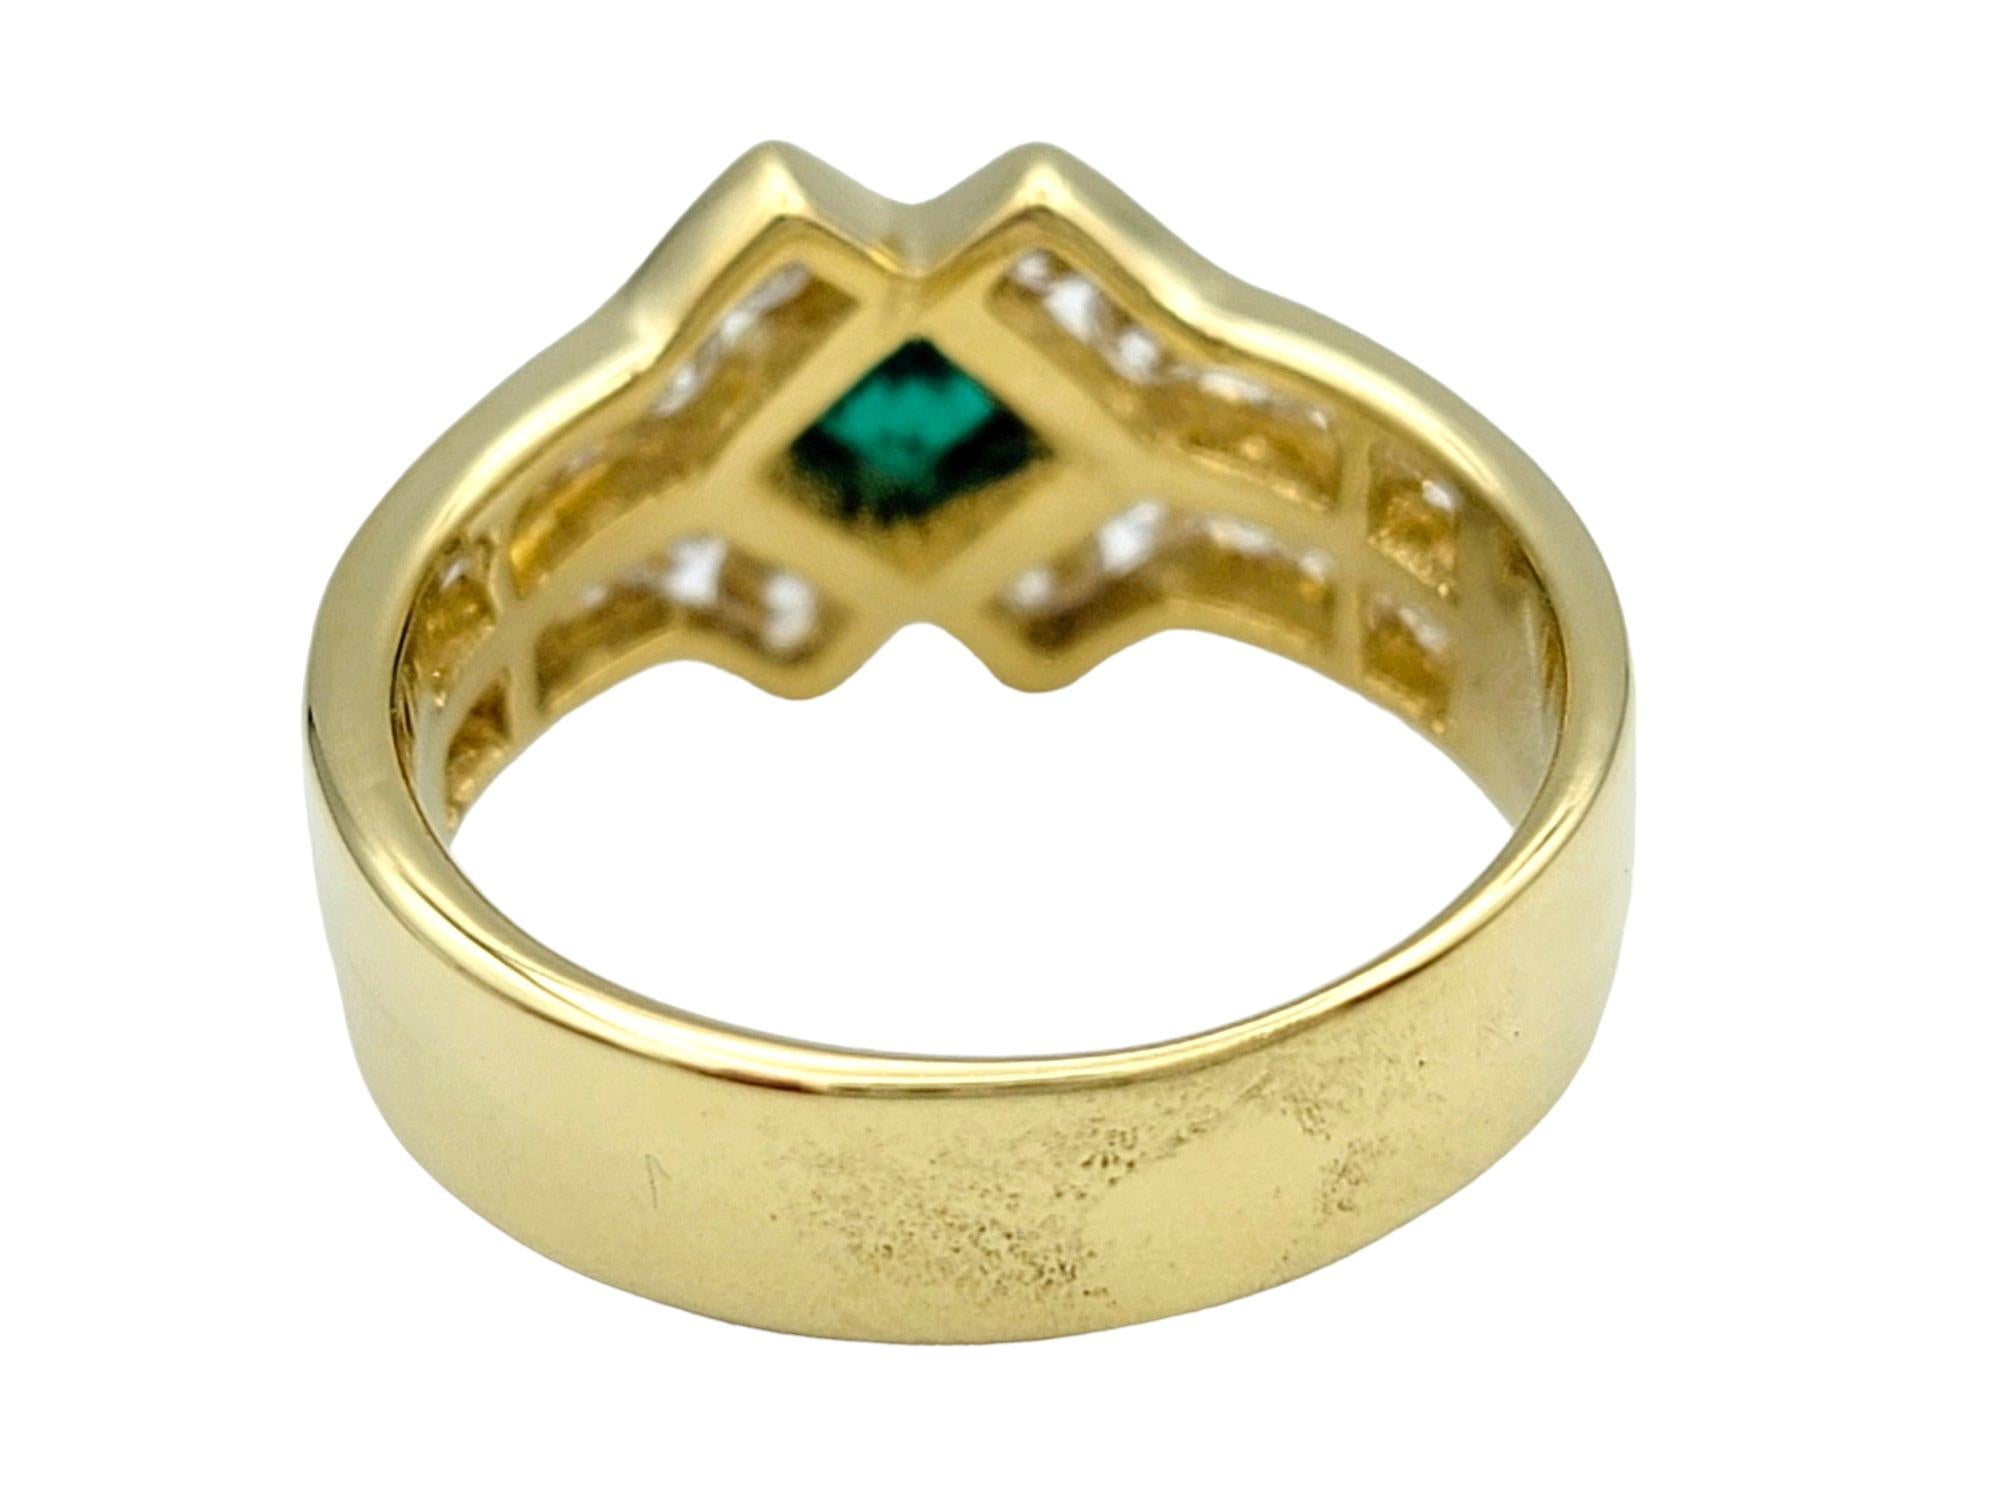 Princess Cut Emerald and Round Diamond Multi Row Band Ring in 18 Karat Gold In Good Condition For Sale In Scottsdale, AZ